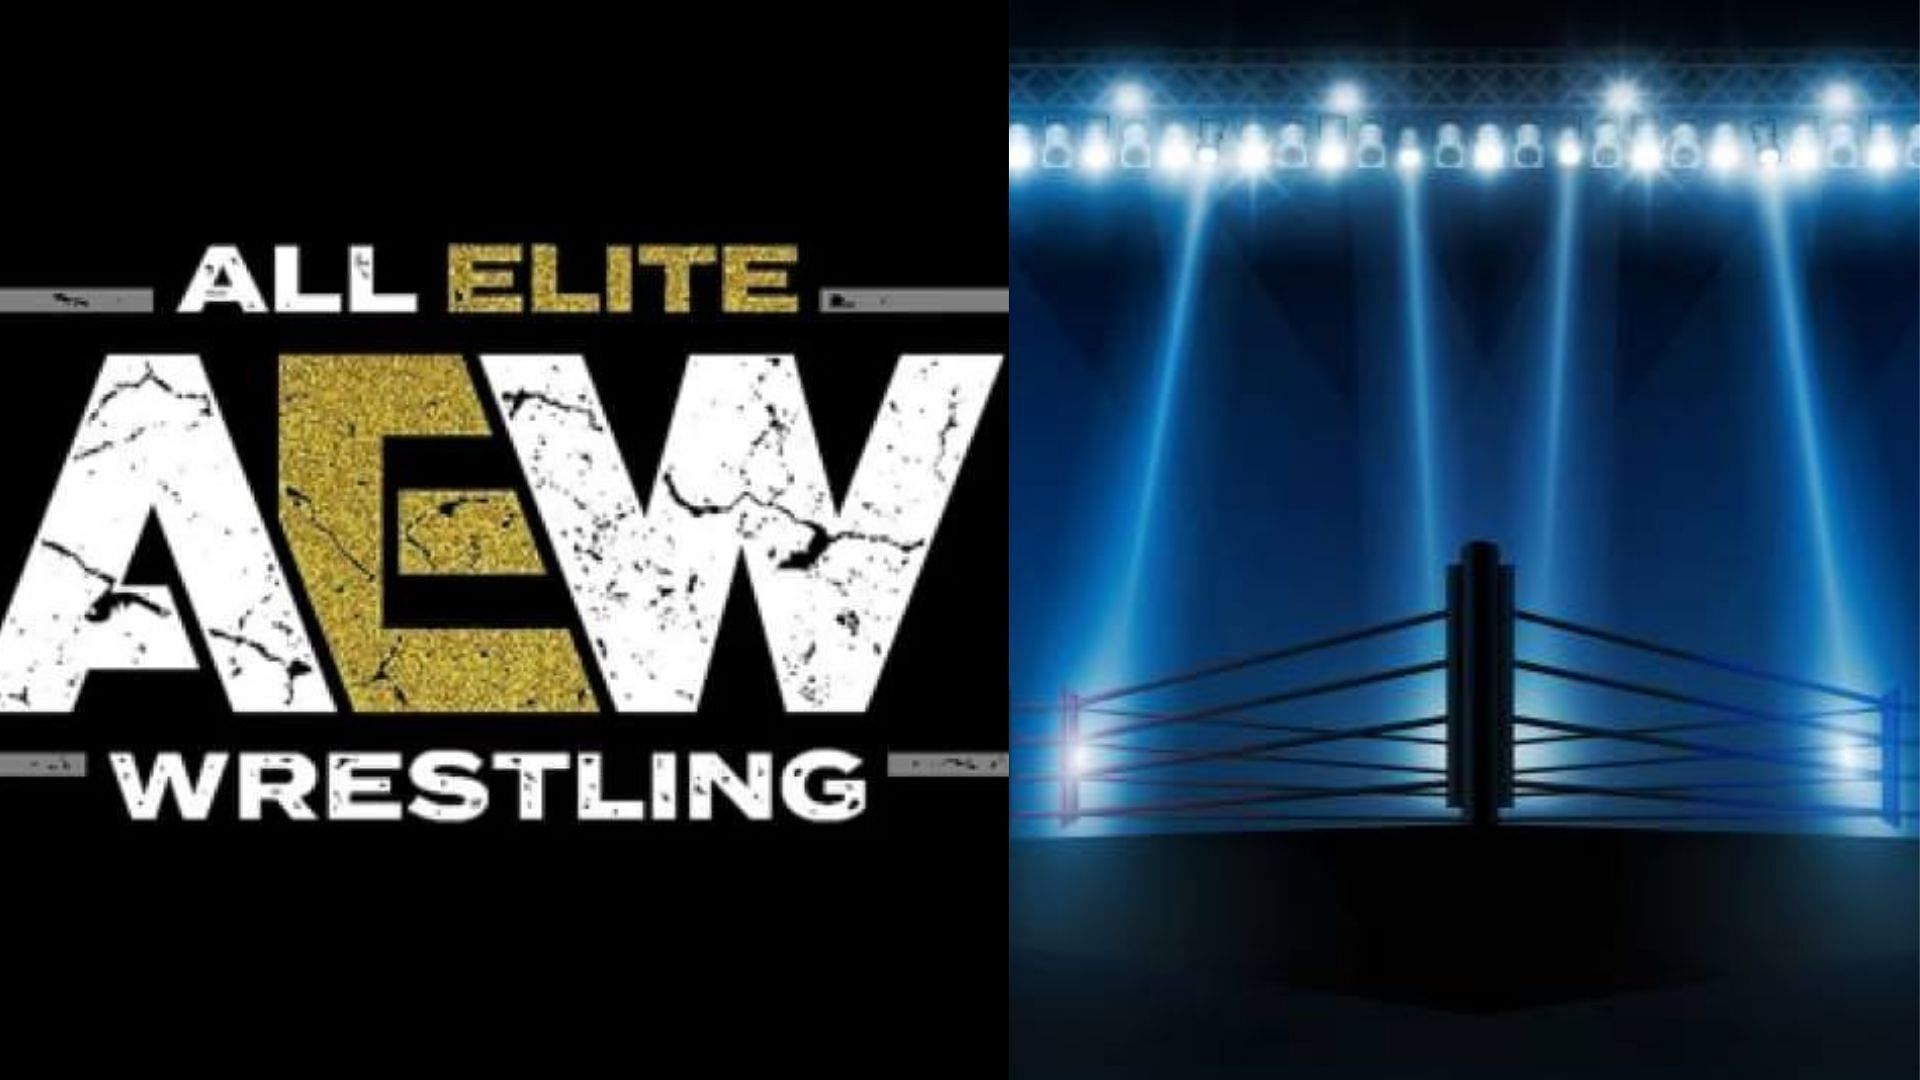 AEW is the second biggest promotion in the world